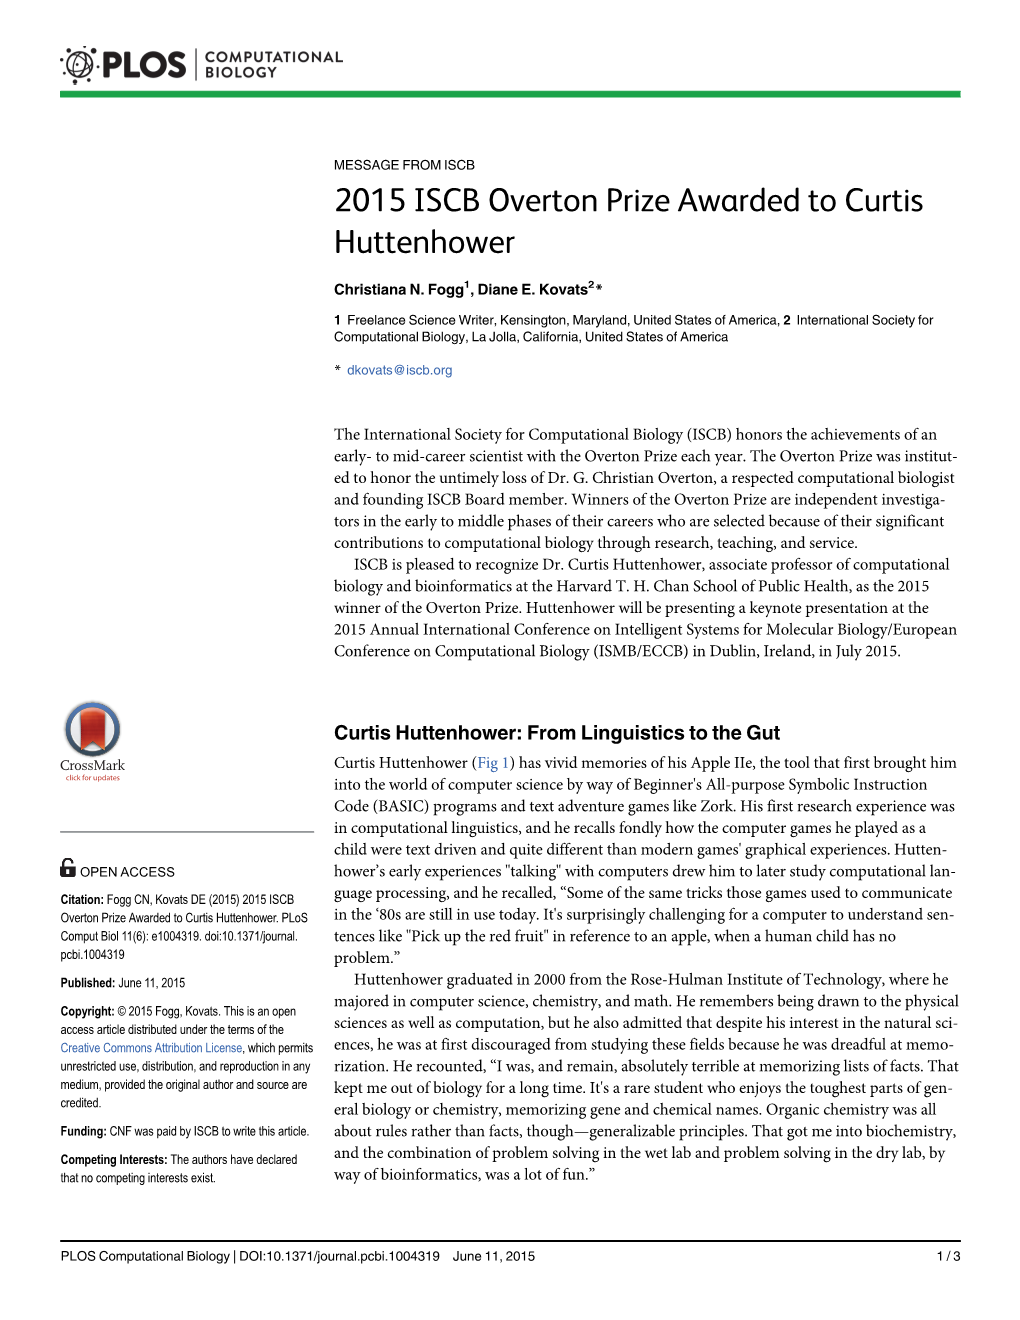 2015 ISCB Overton Prize Awarded to Curtis Huttenhower